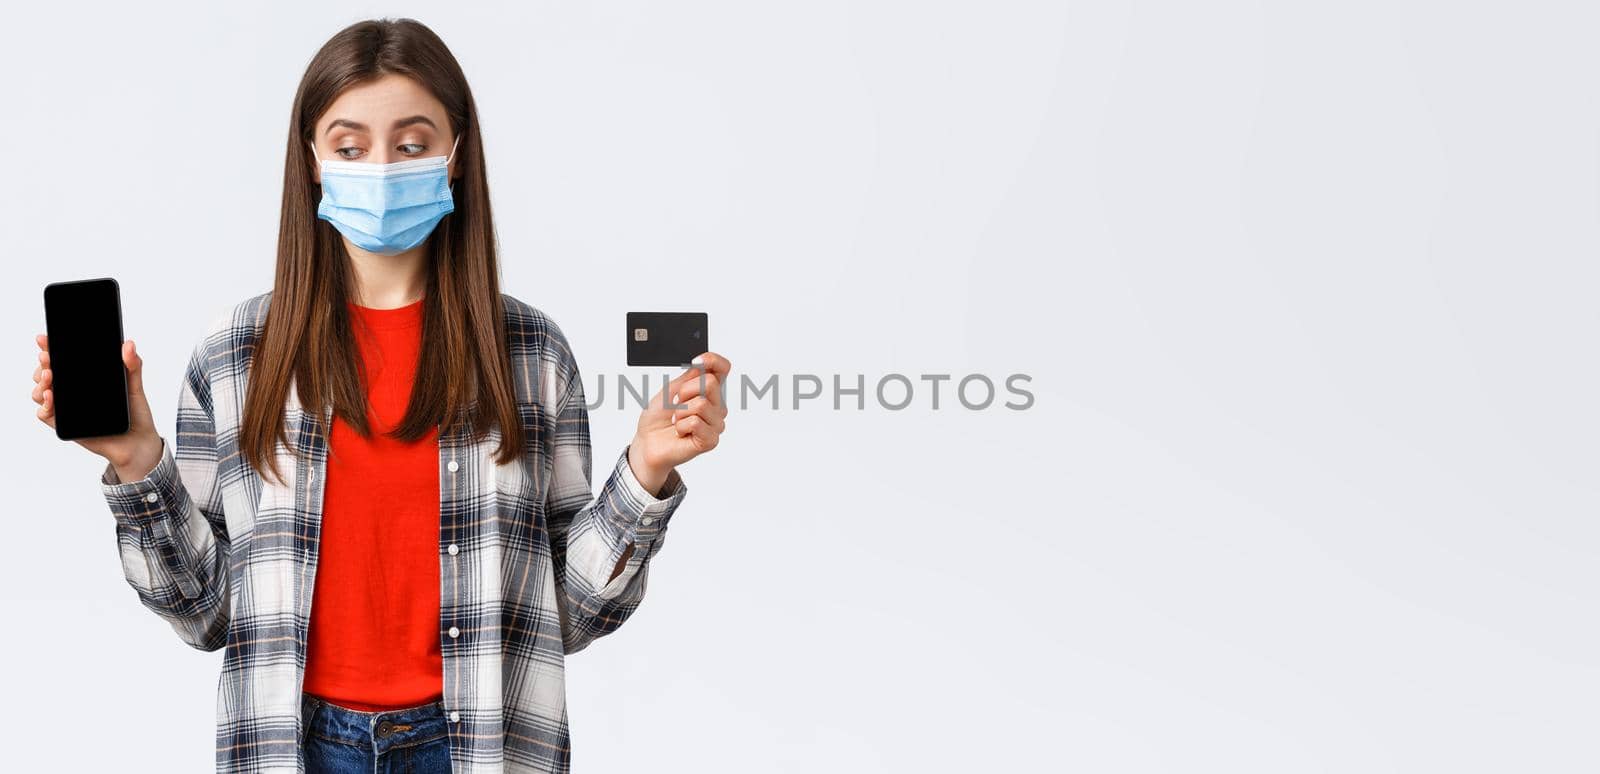 Coronavirus outbreak, working from home, online shopping and contactless payment concept. Girl in medical mask showing mobile phone and credit card, peek at screen making order by Benzoix